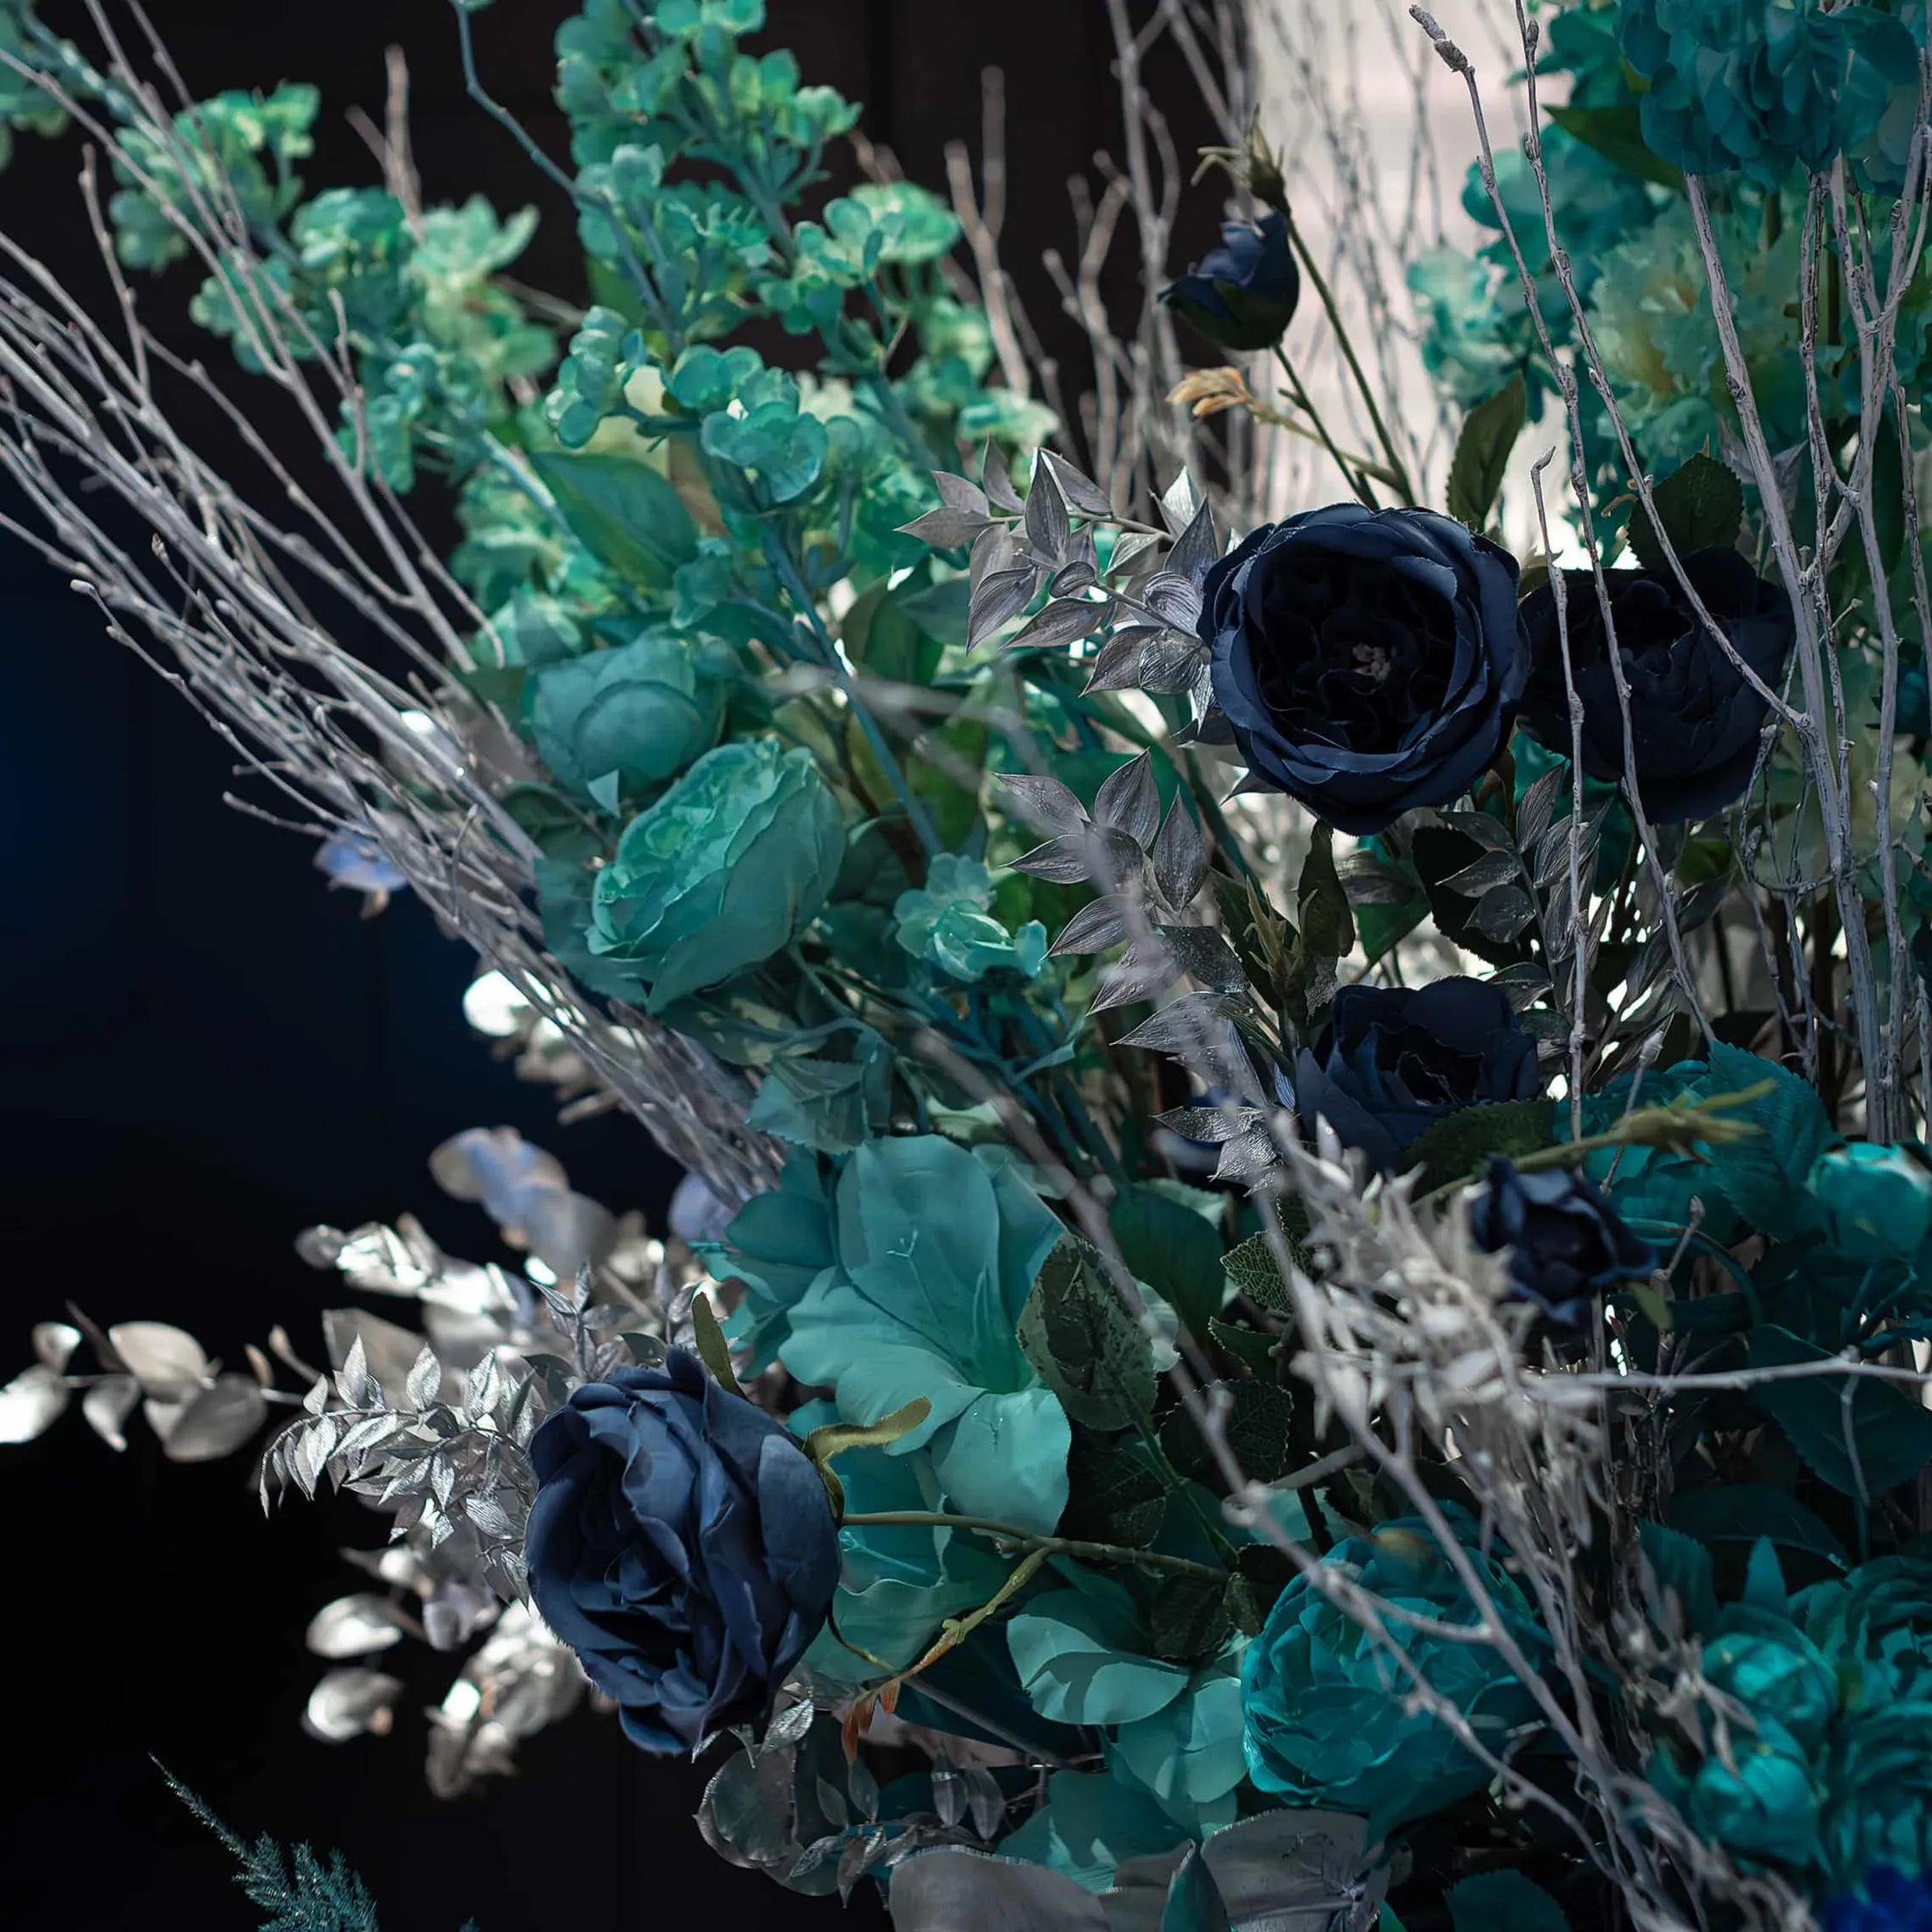 Close-up of a lush arrangement featuring deep navy blue roses, teal hydrangeas, and silver leaves, with delicate branches adding texture against a dark background.